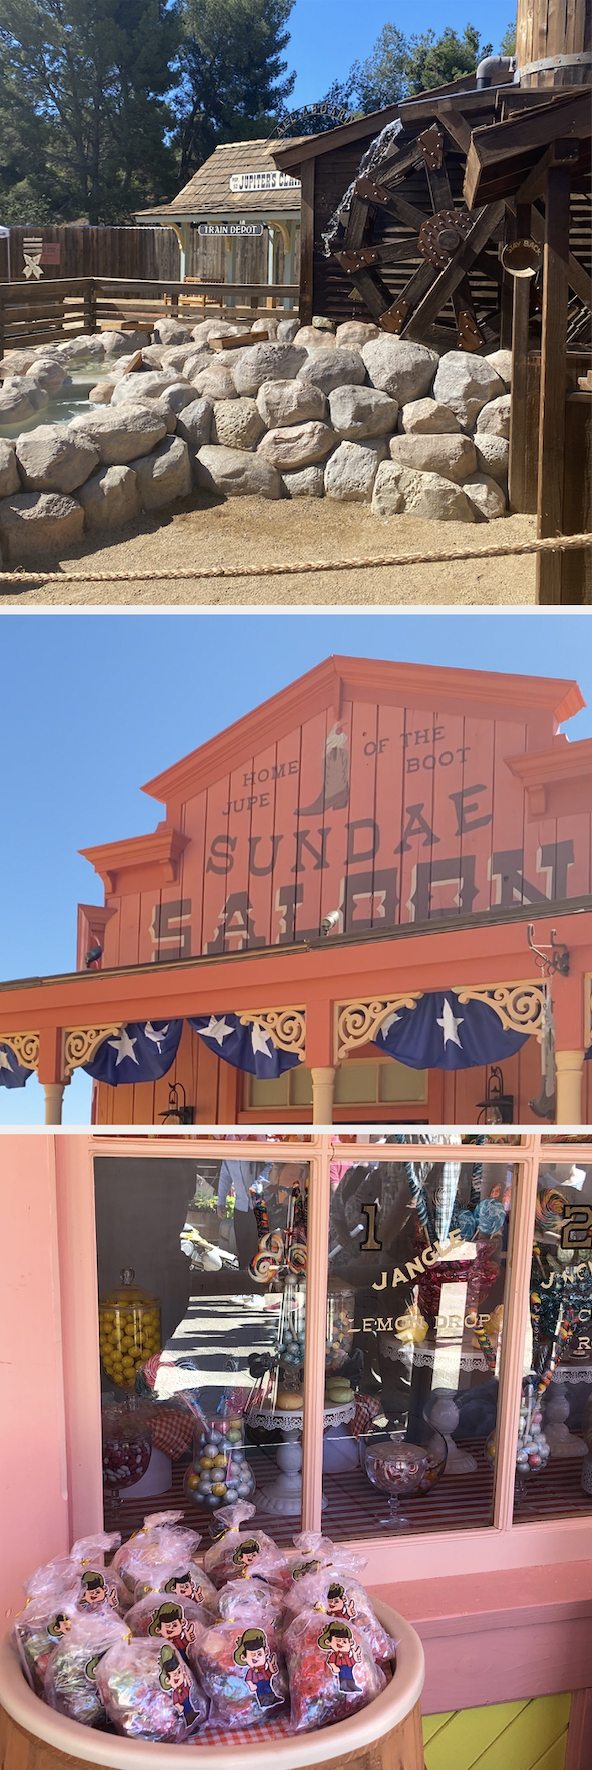 Photos of a train depot, saloon, and candy shop on set